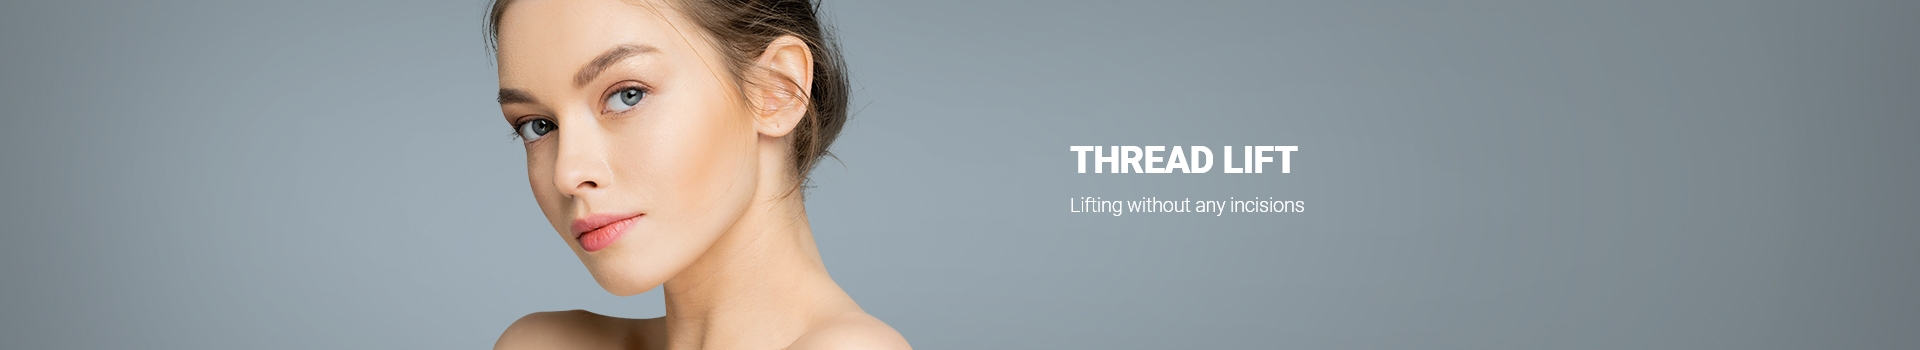 THREAD LIFT Lifting without any incisions